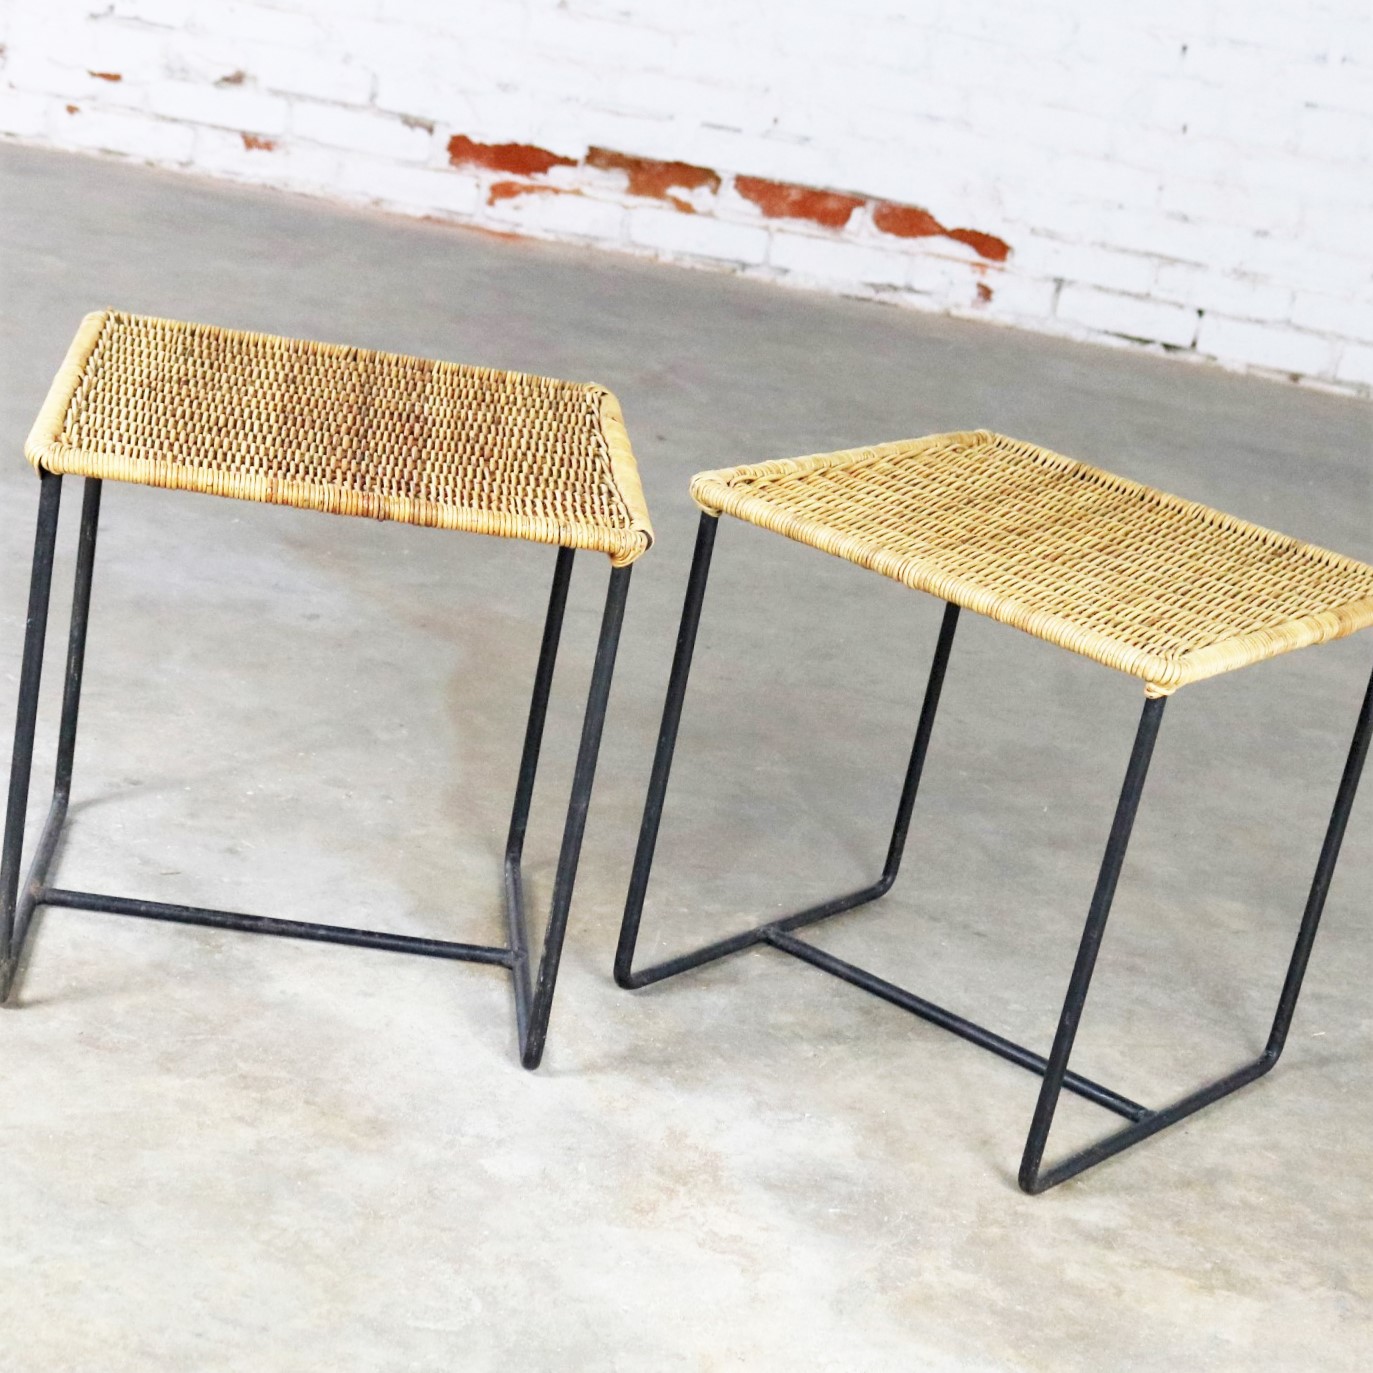 Calif-Asia Style Wrought Iron and Rattan Side Tables Mid Century Modern, a Pair